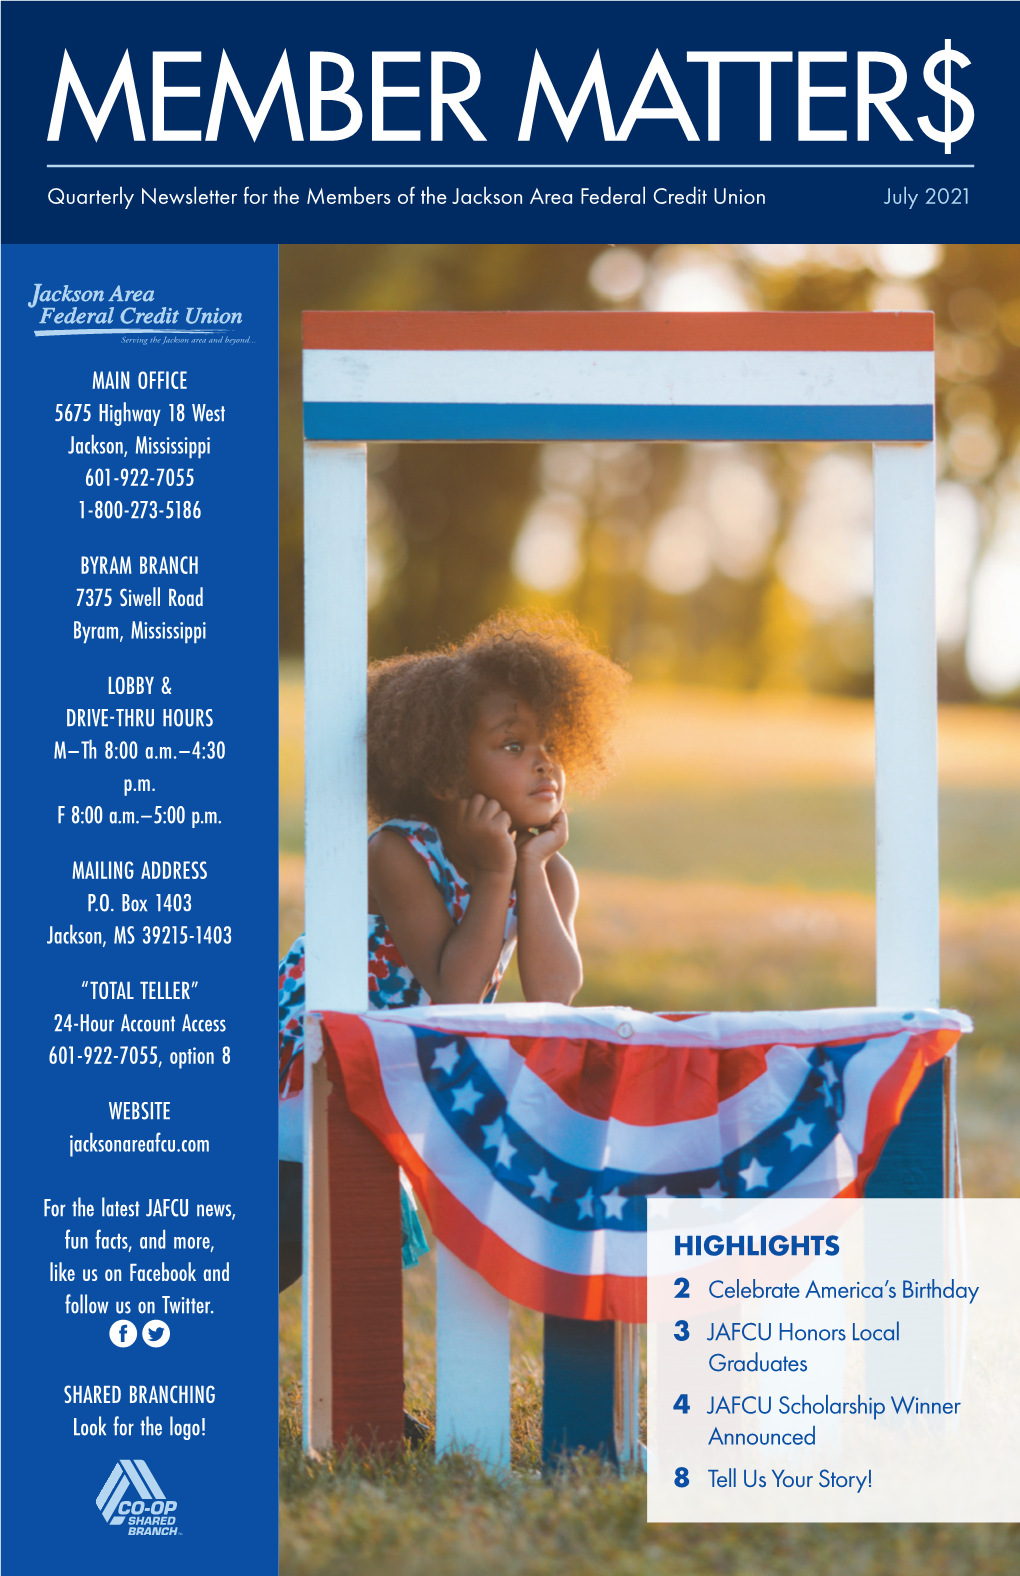 Newsletter for the Members of the Jackson Area Federal Credit Union July 2021